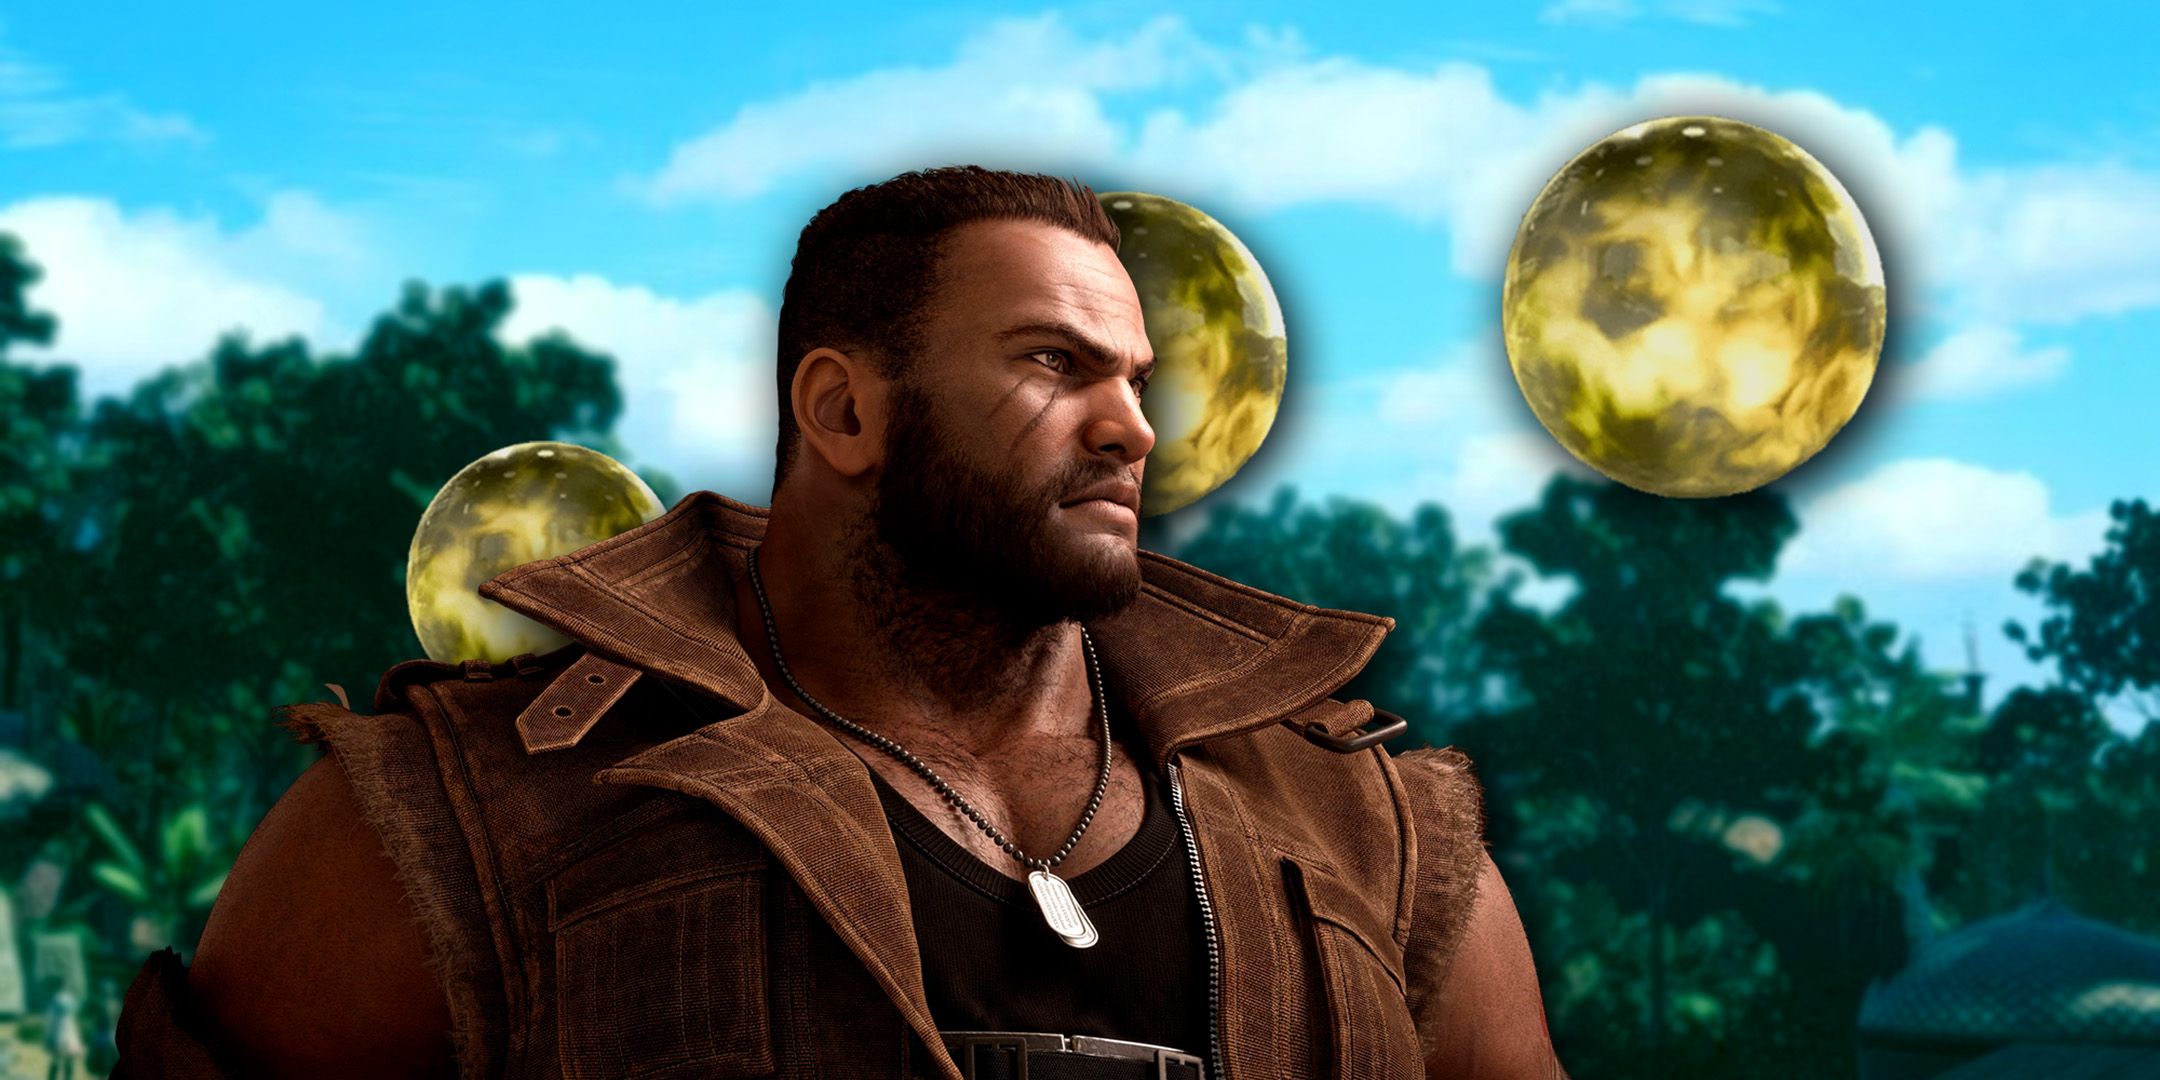 Barret from Final Fantasy 7 Rebirth staring at yellow command materia